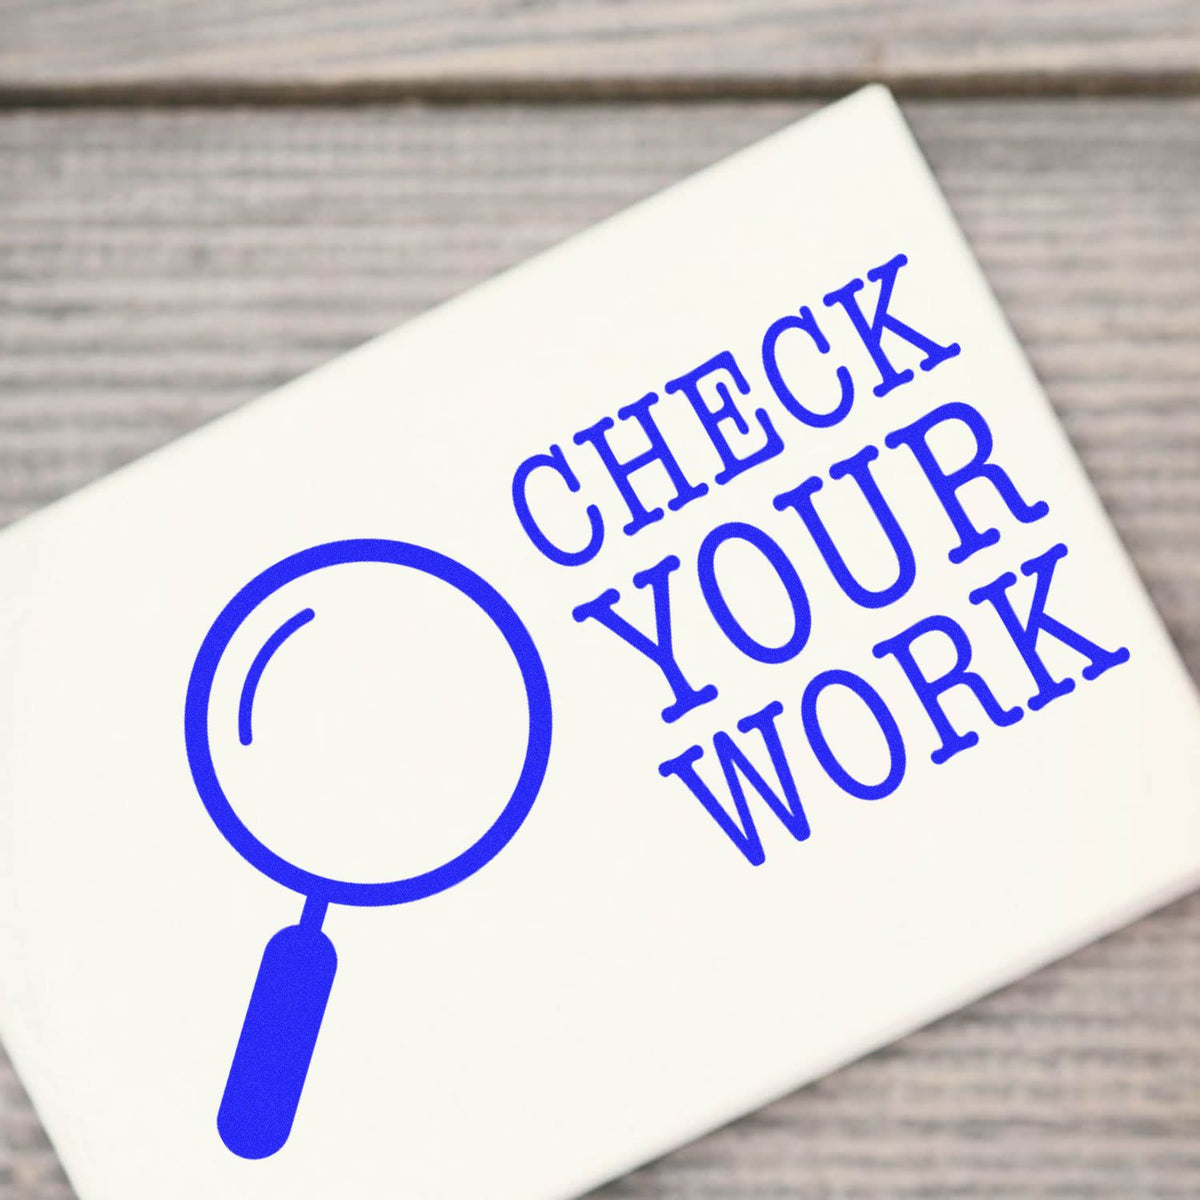 Large Check Your Work Rubber Stamp In Use Photo